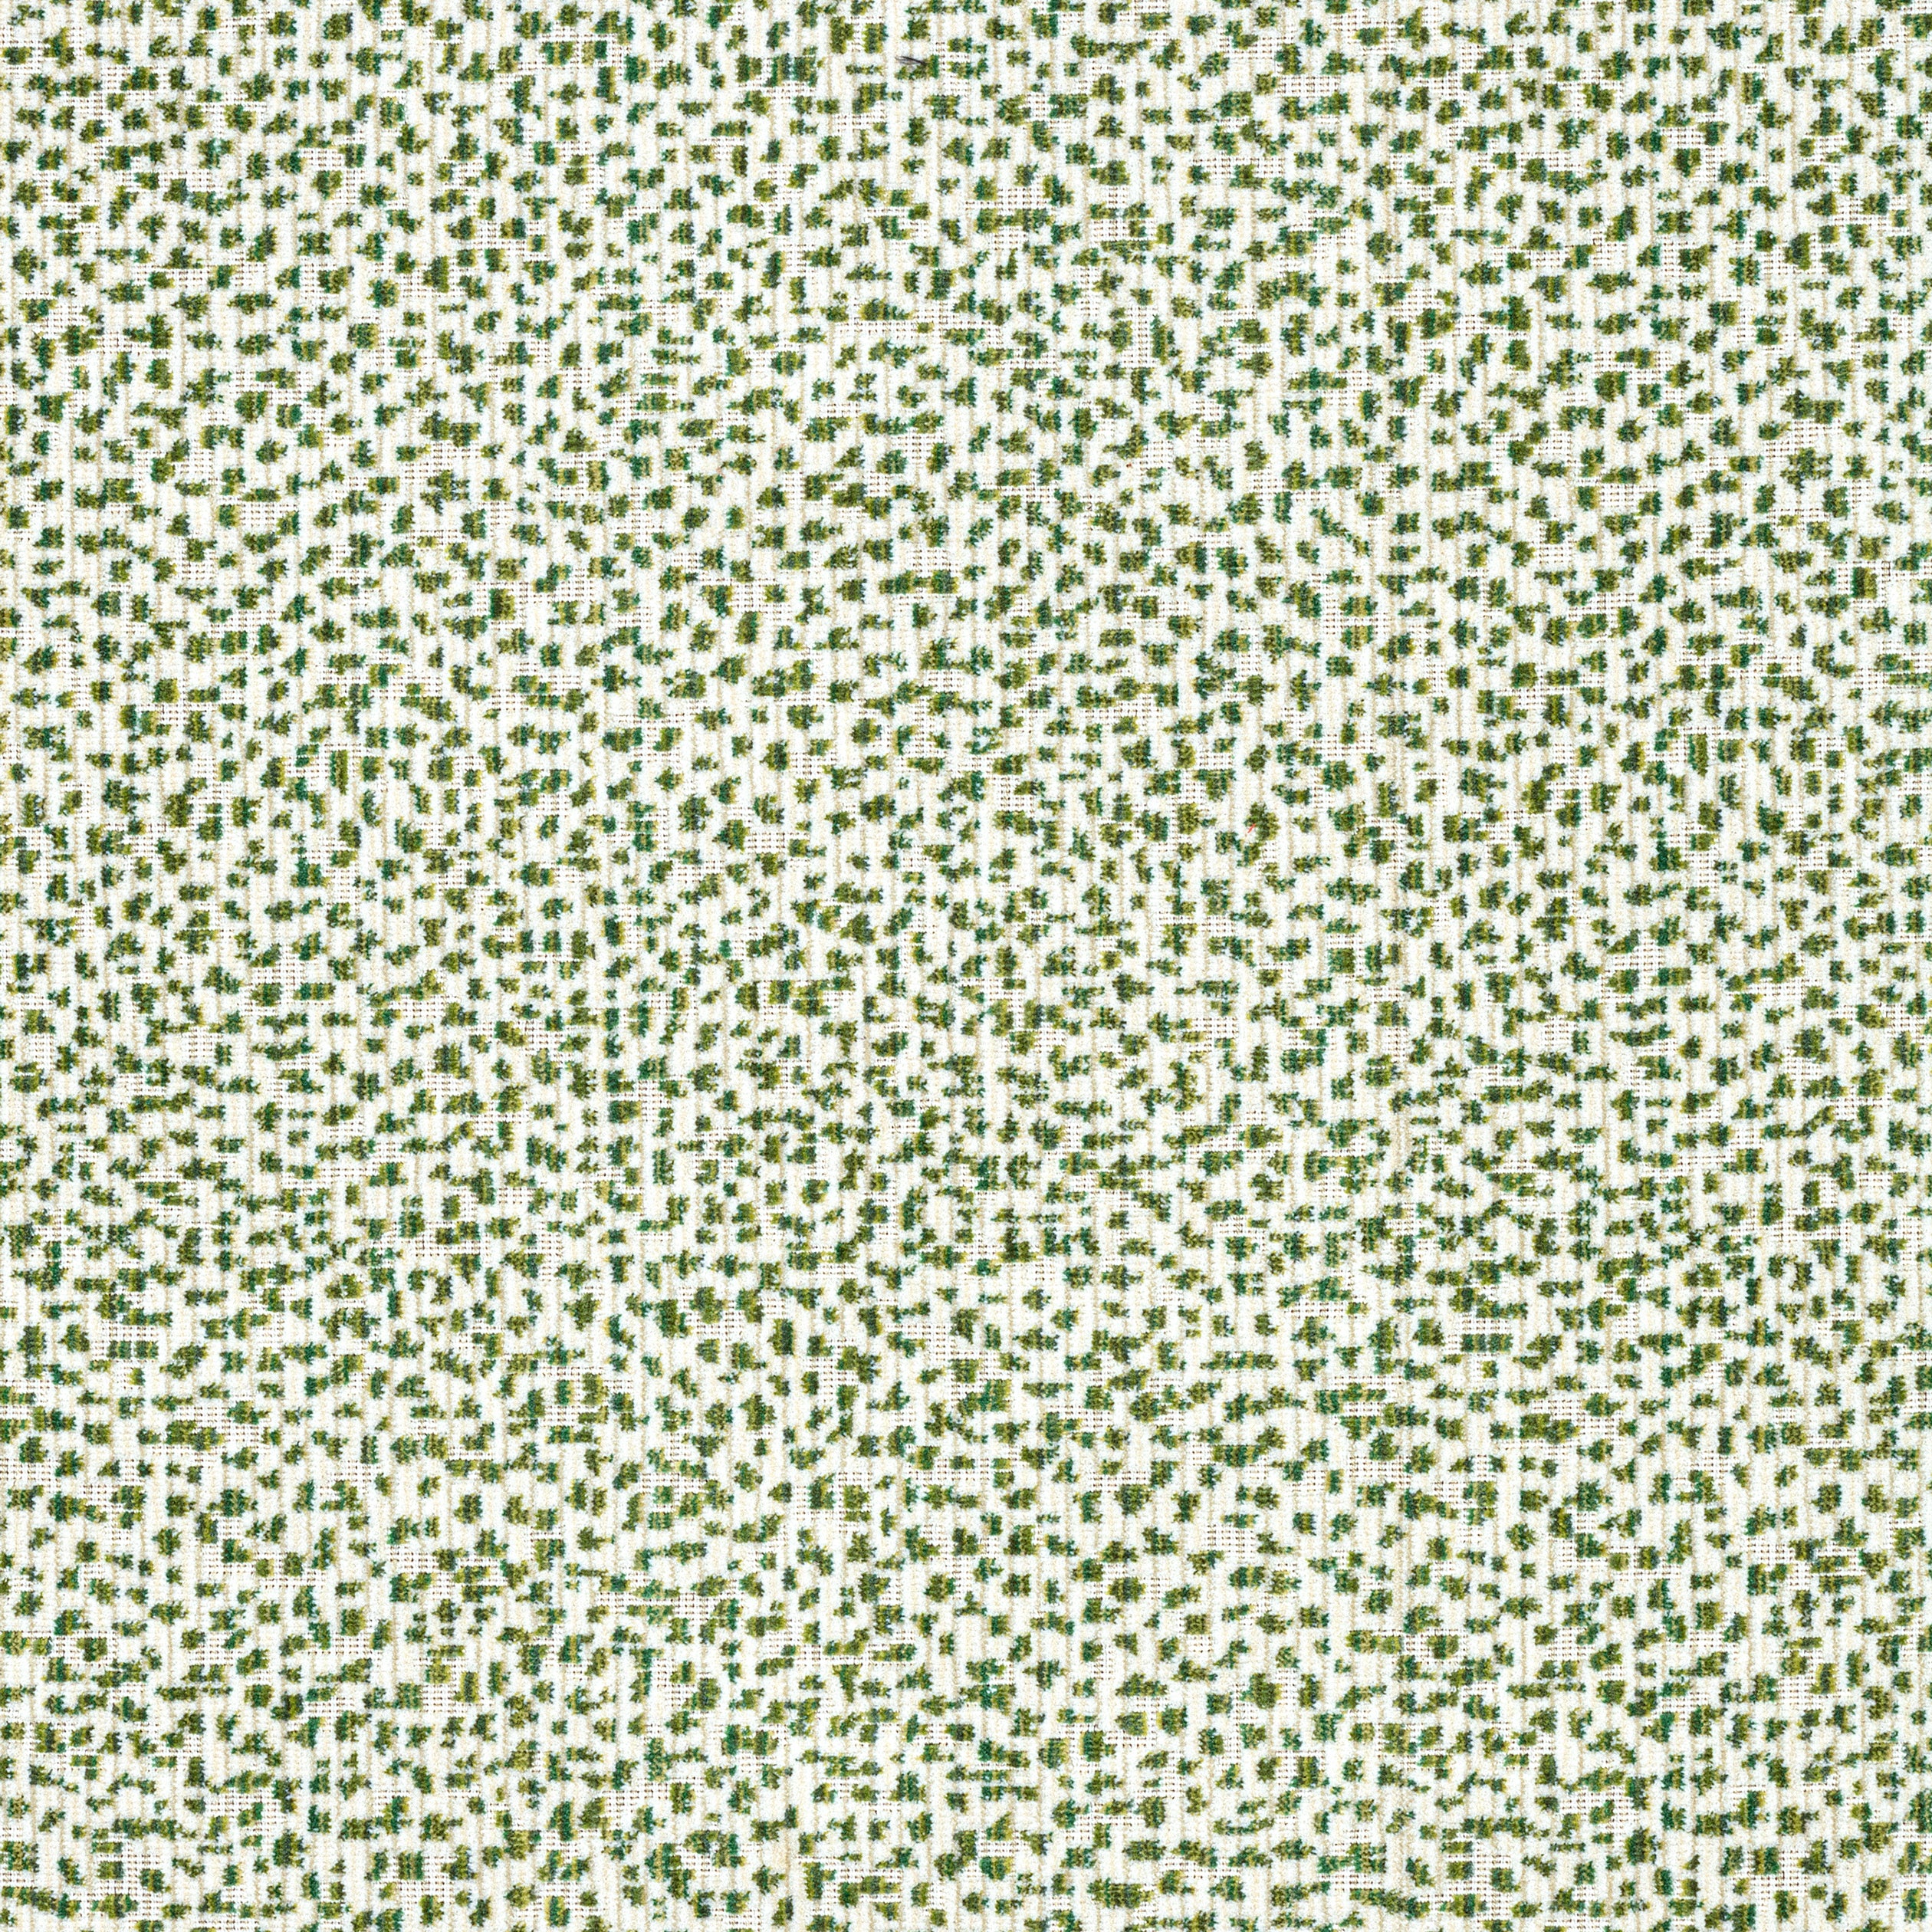 Swing Velvet fabric in emerald color - pattern number W72801 - by Thibaut in the Woven Resource 13: Fusion Velvets collection